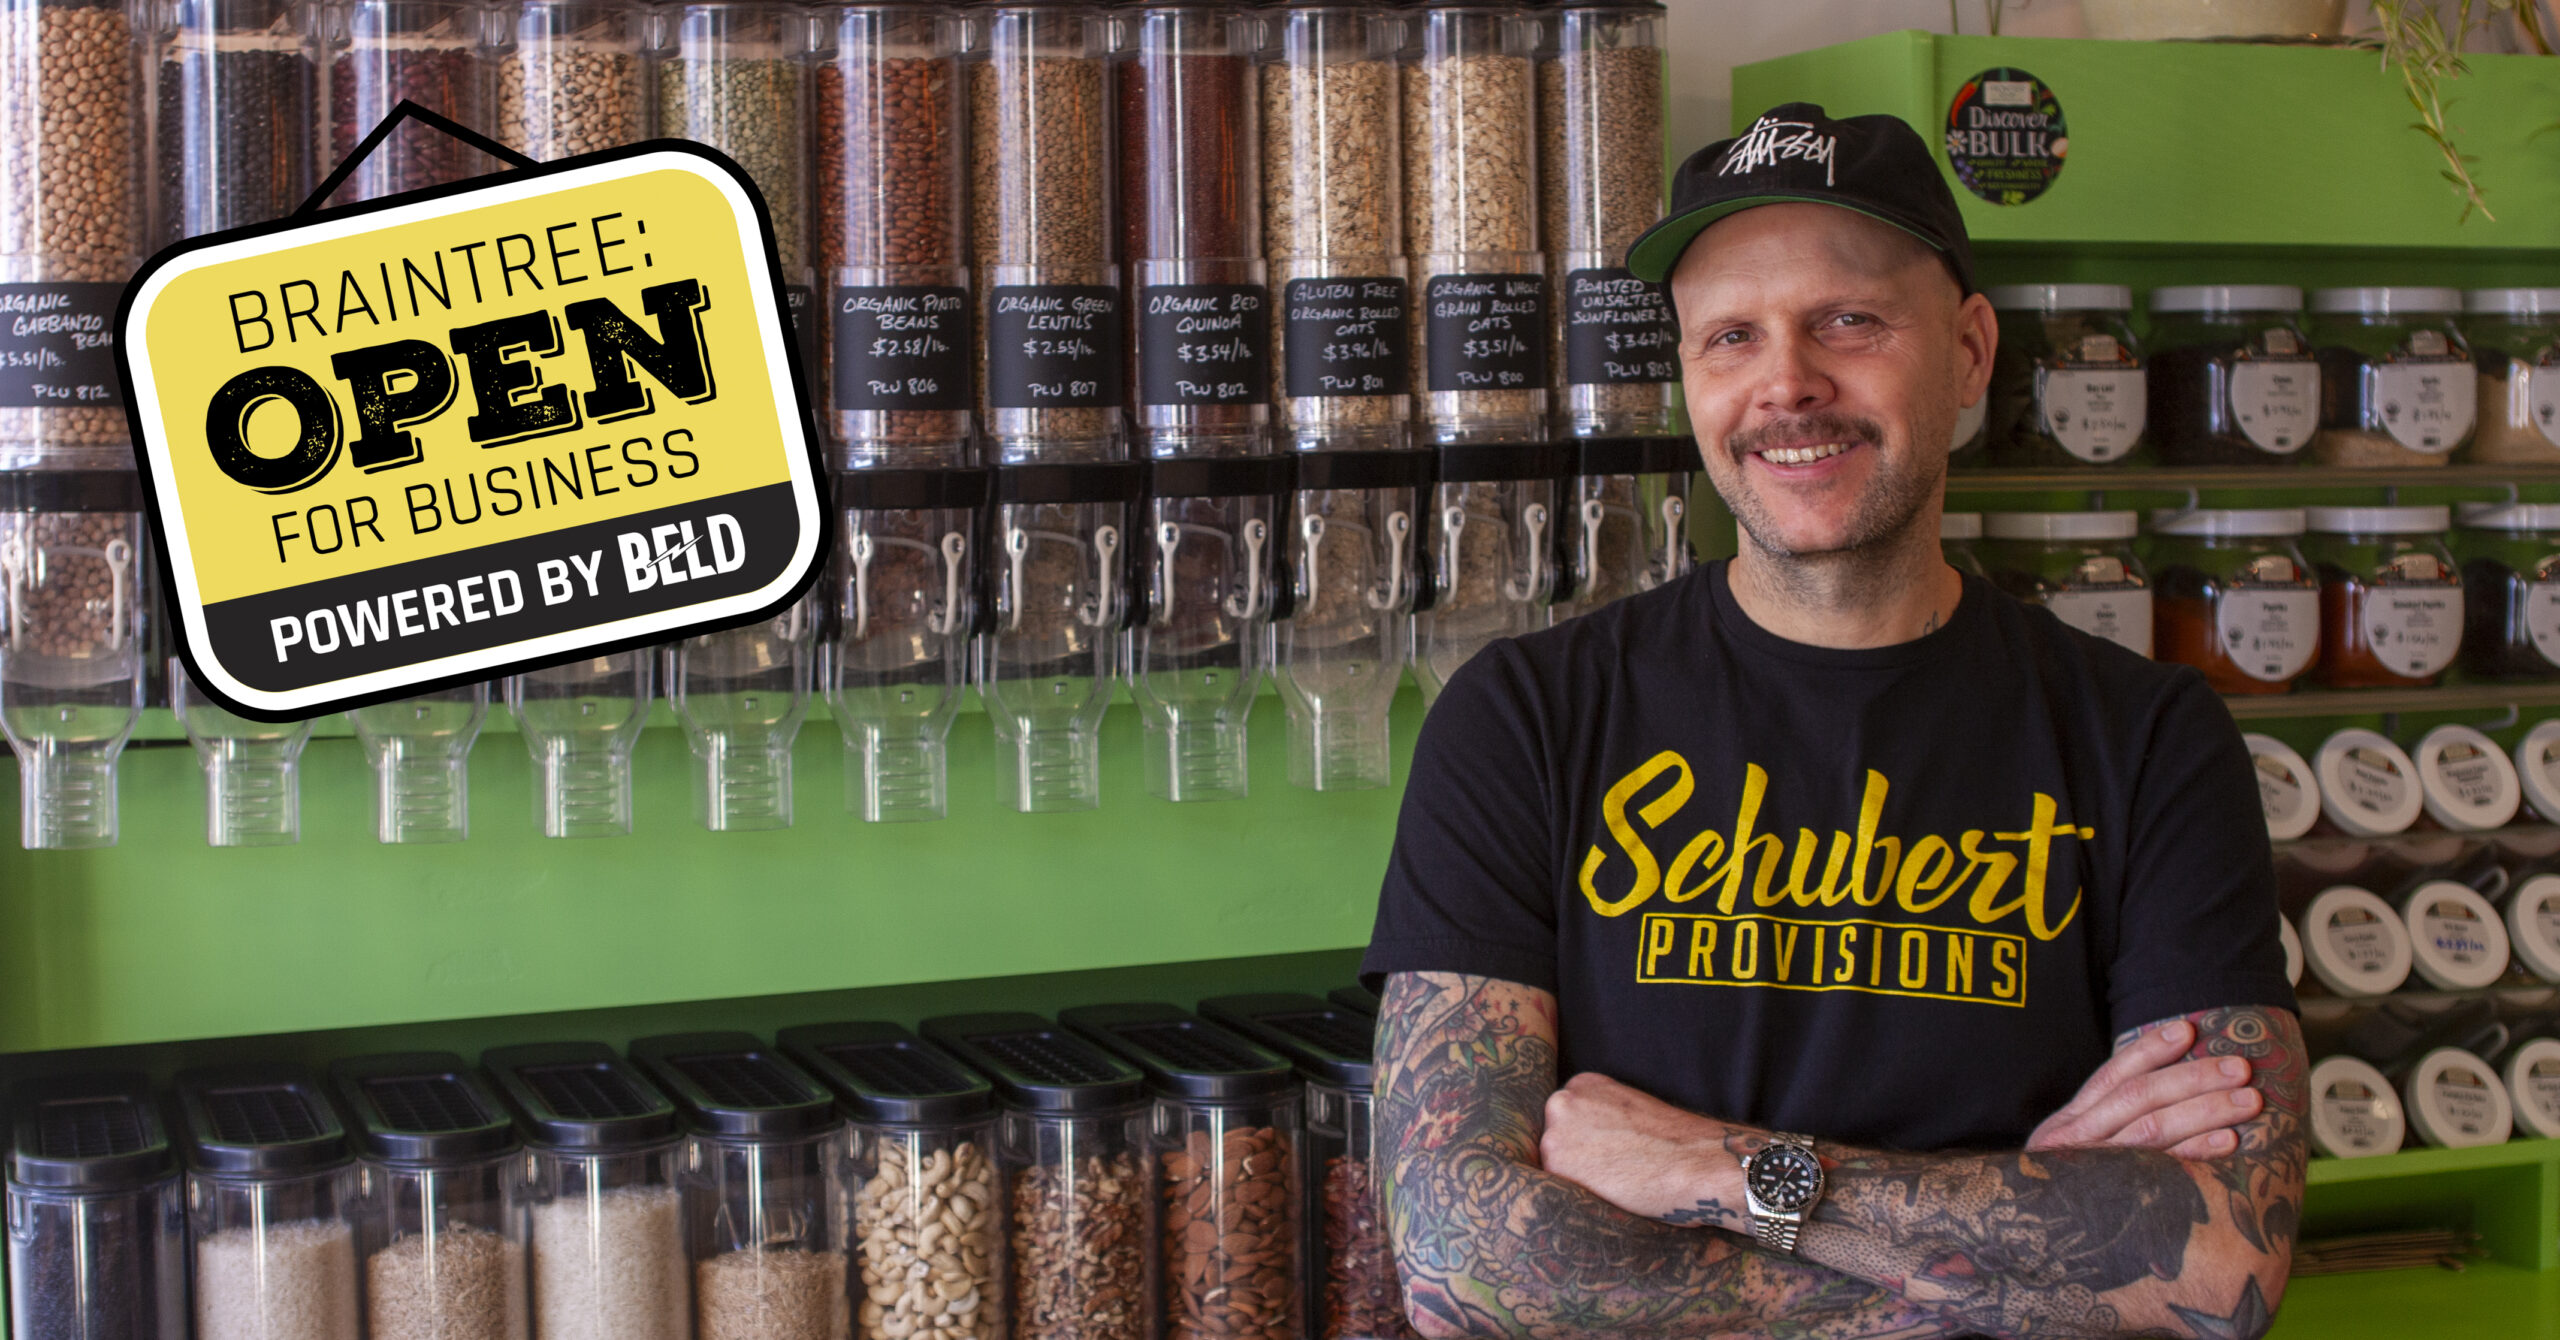 Schubert Provisions co-owner Keith